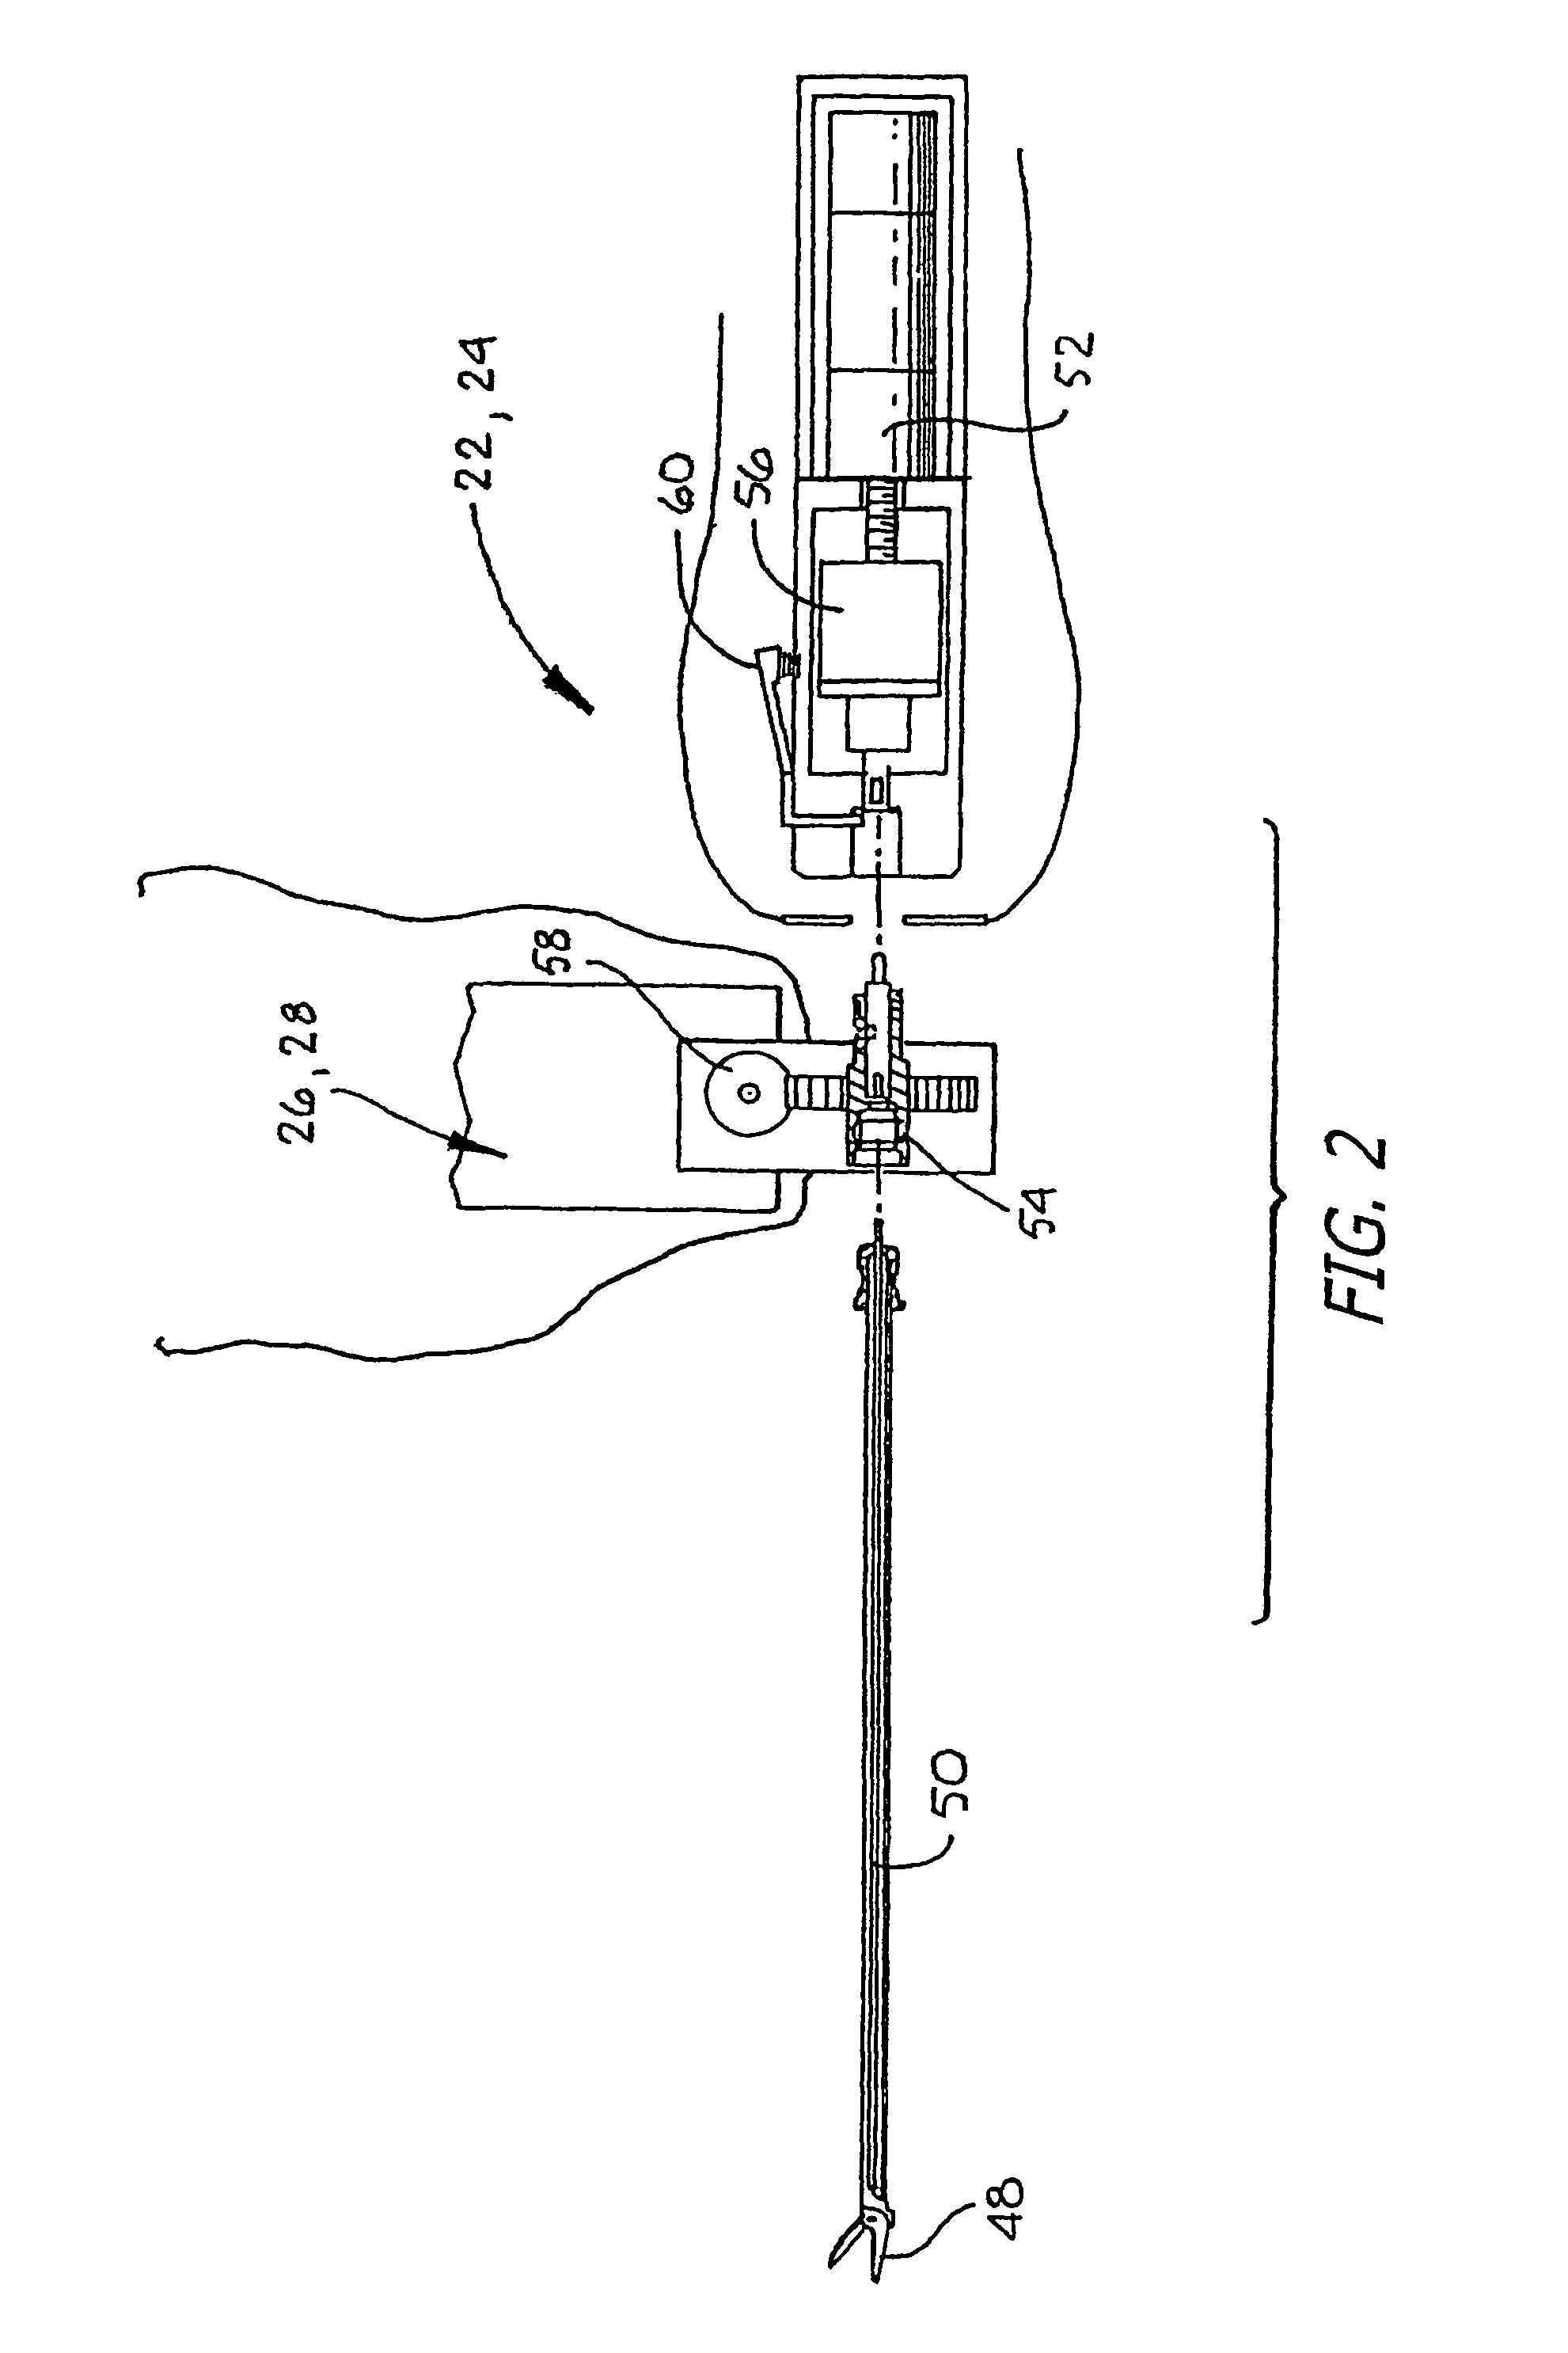 Constraint based control in a minimally invasive surgical apparatus